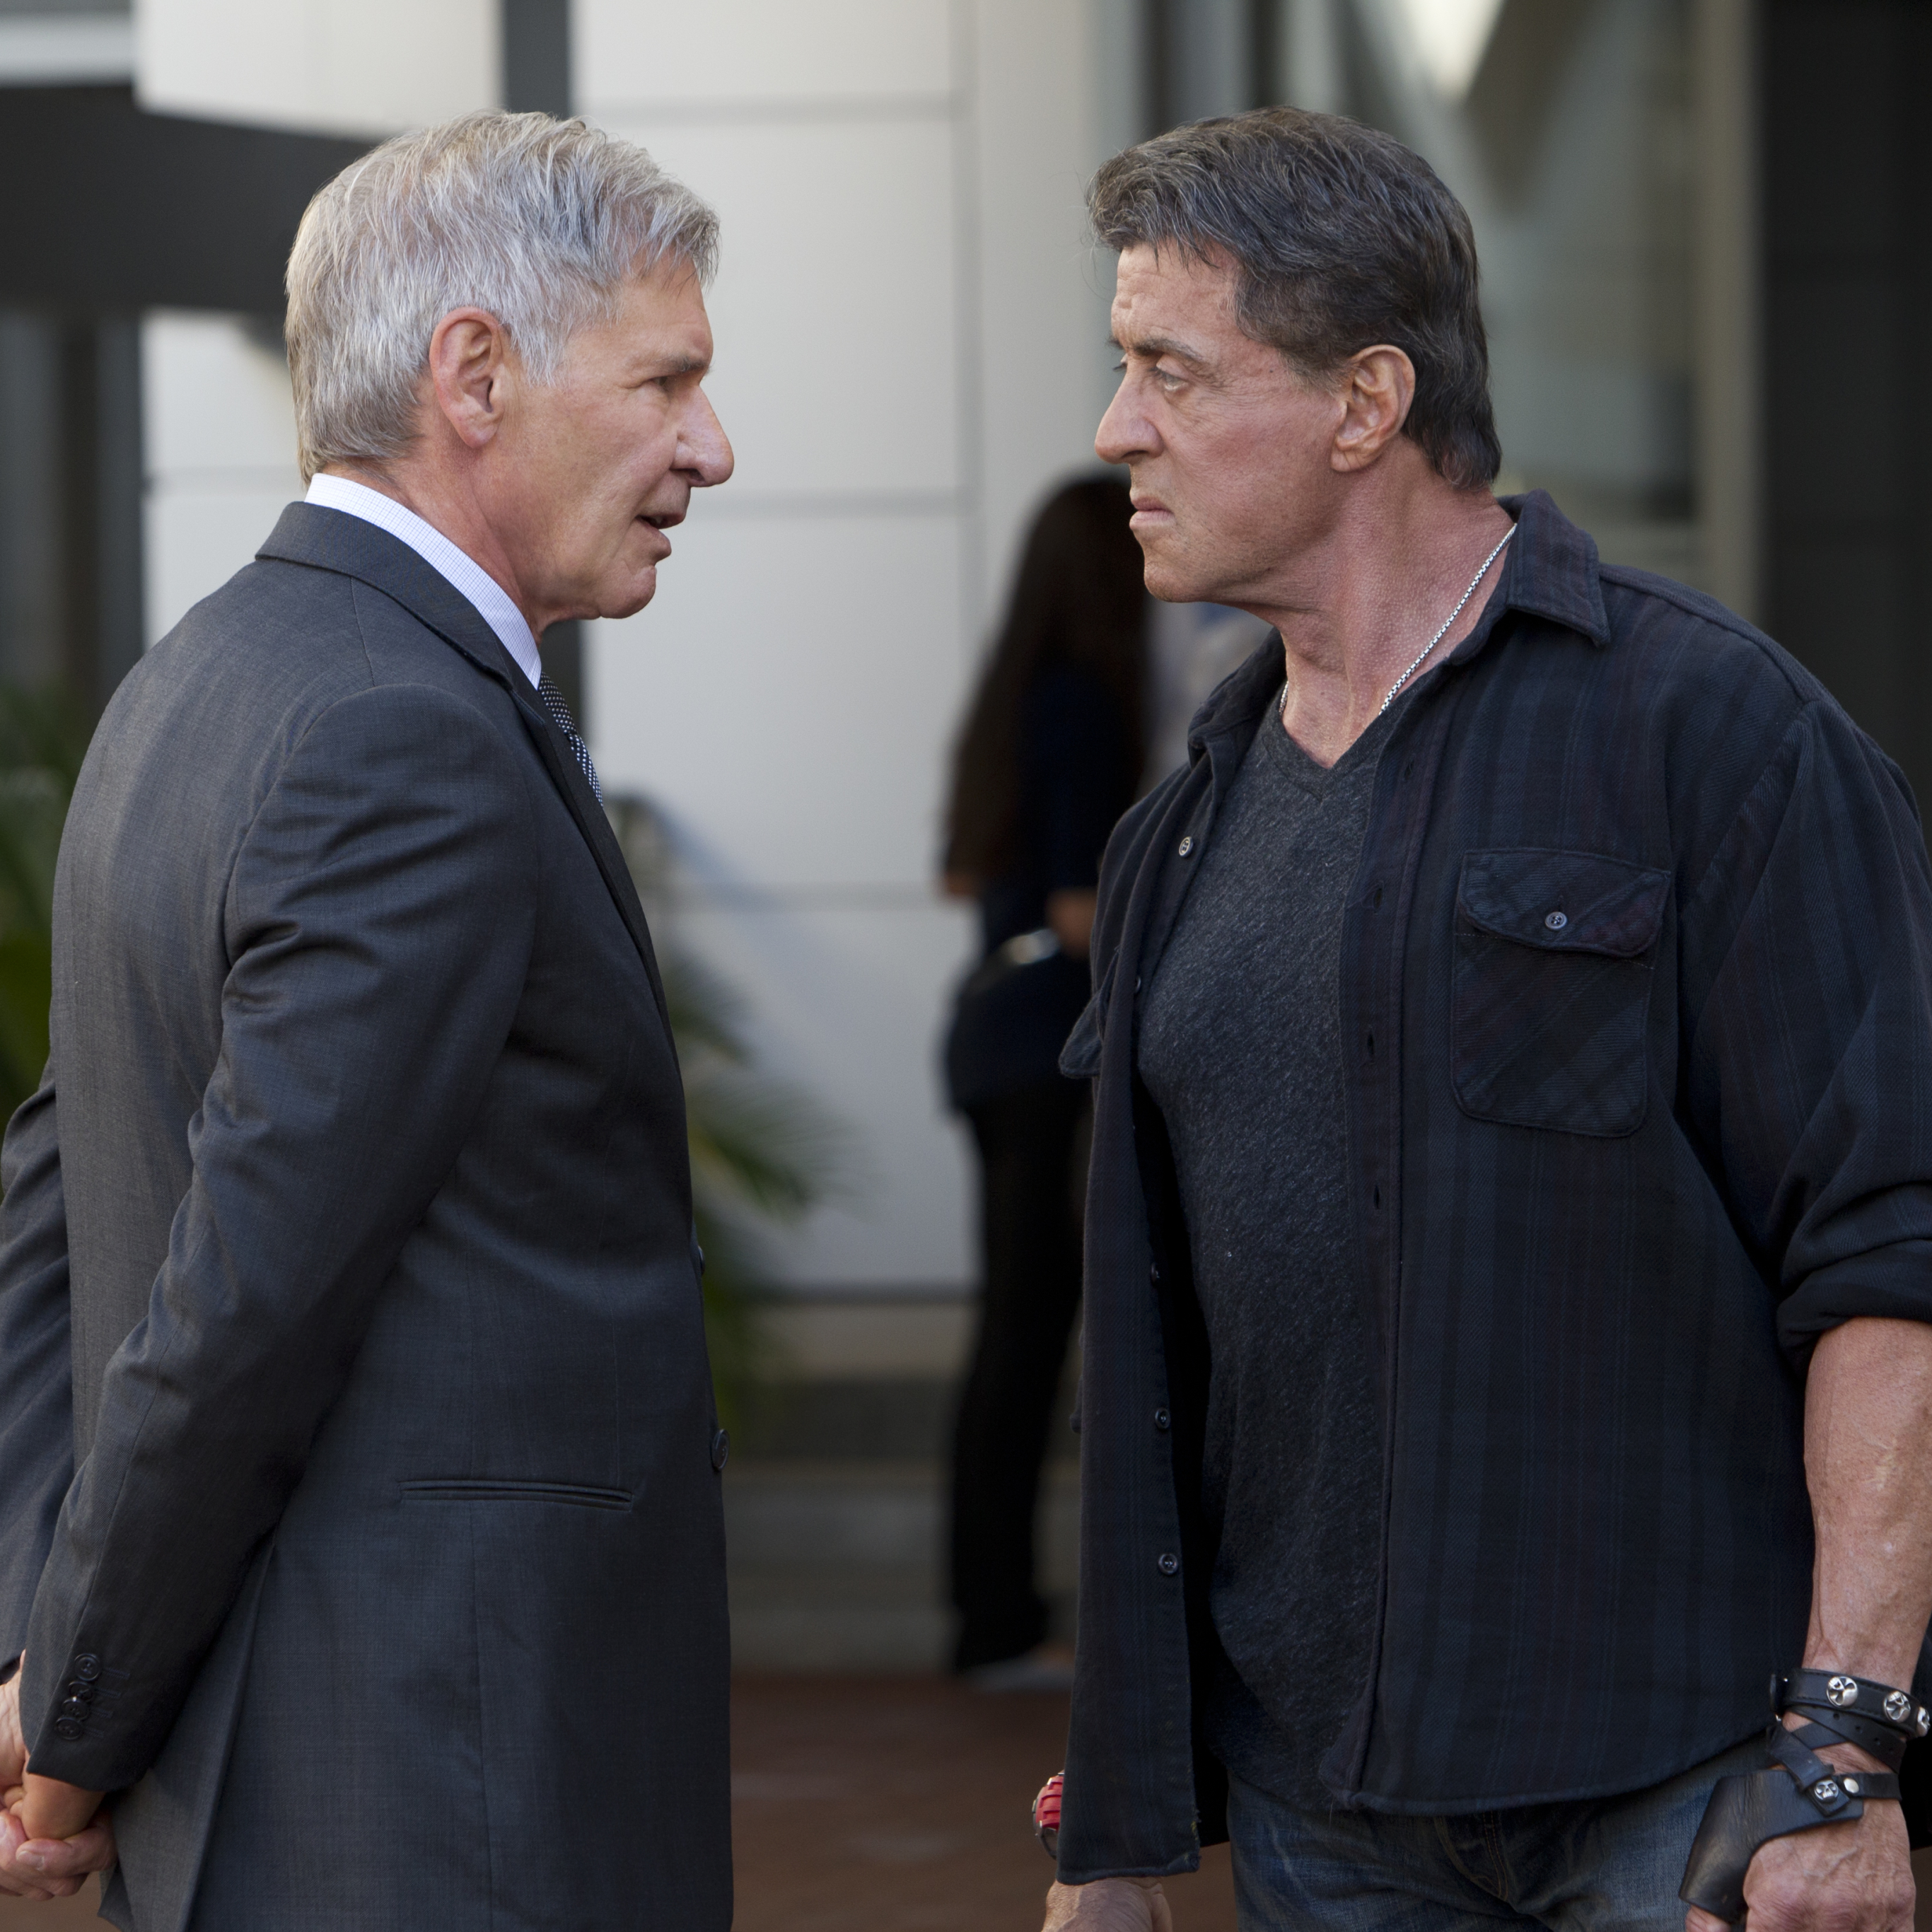 harrison ford, movie, the expendables 3, sylvester stallone, barney ross, max drummer, the expendables